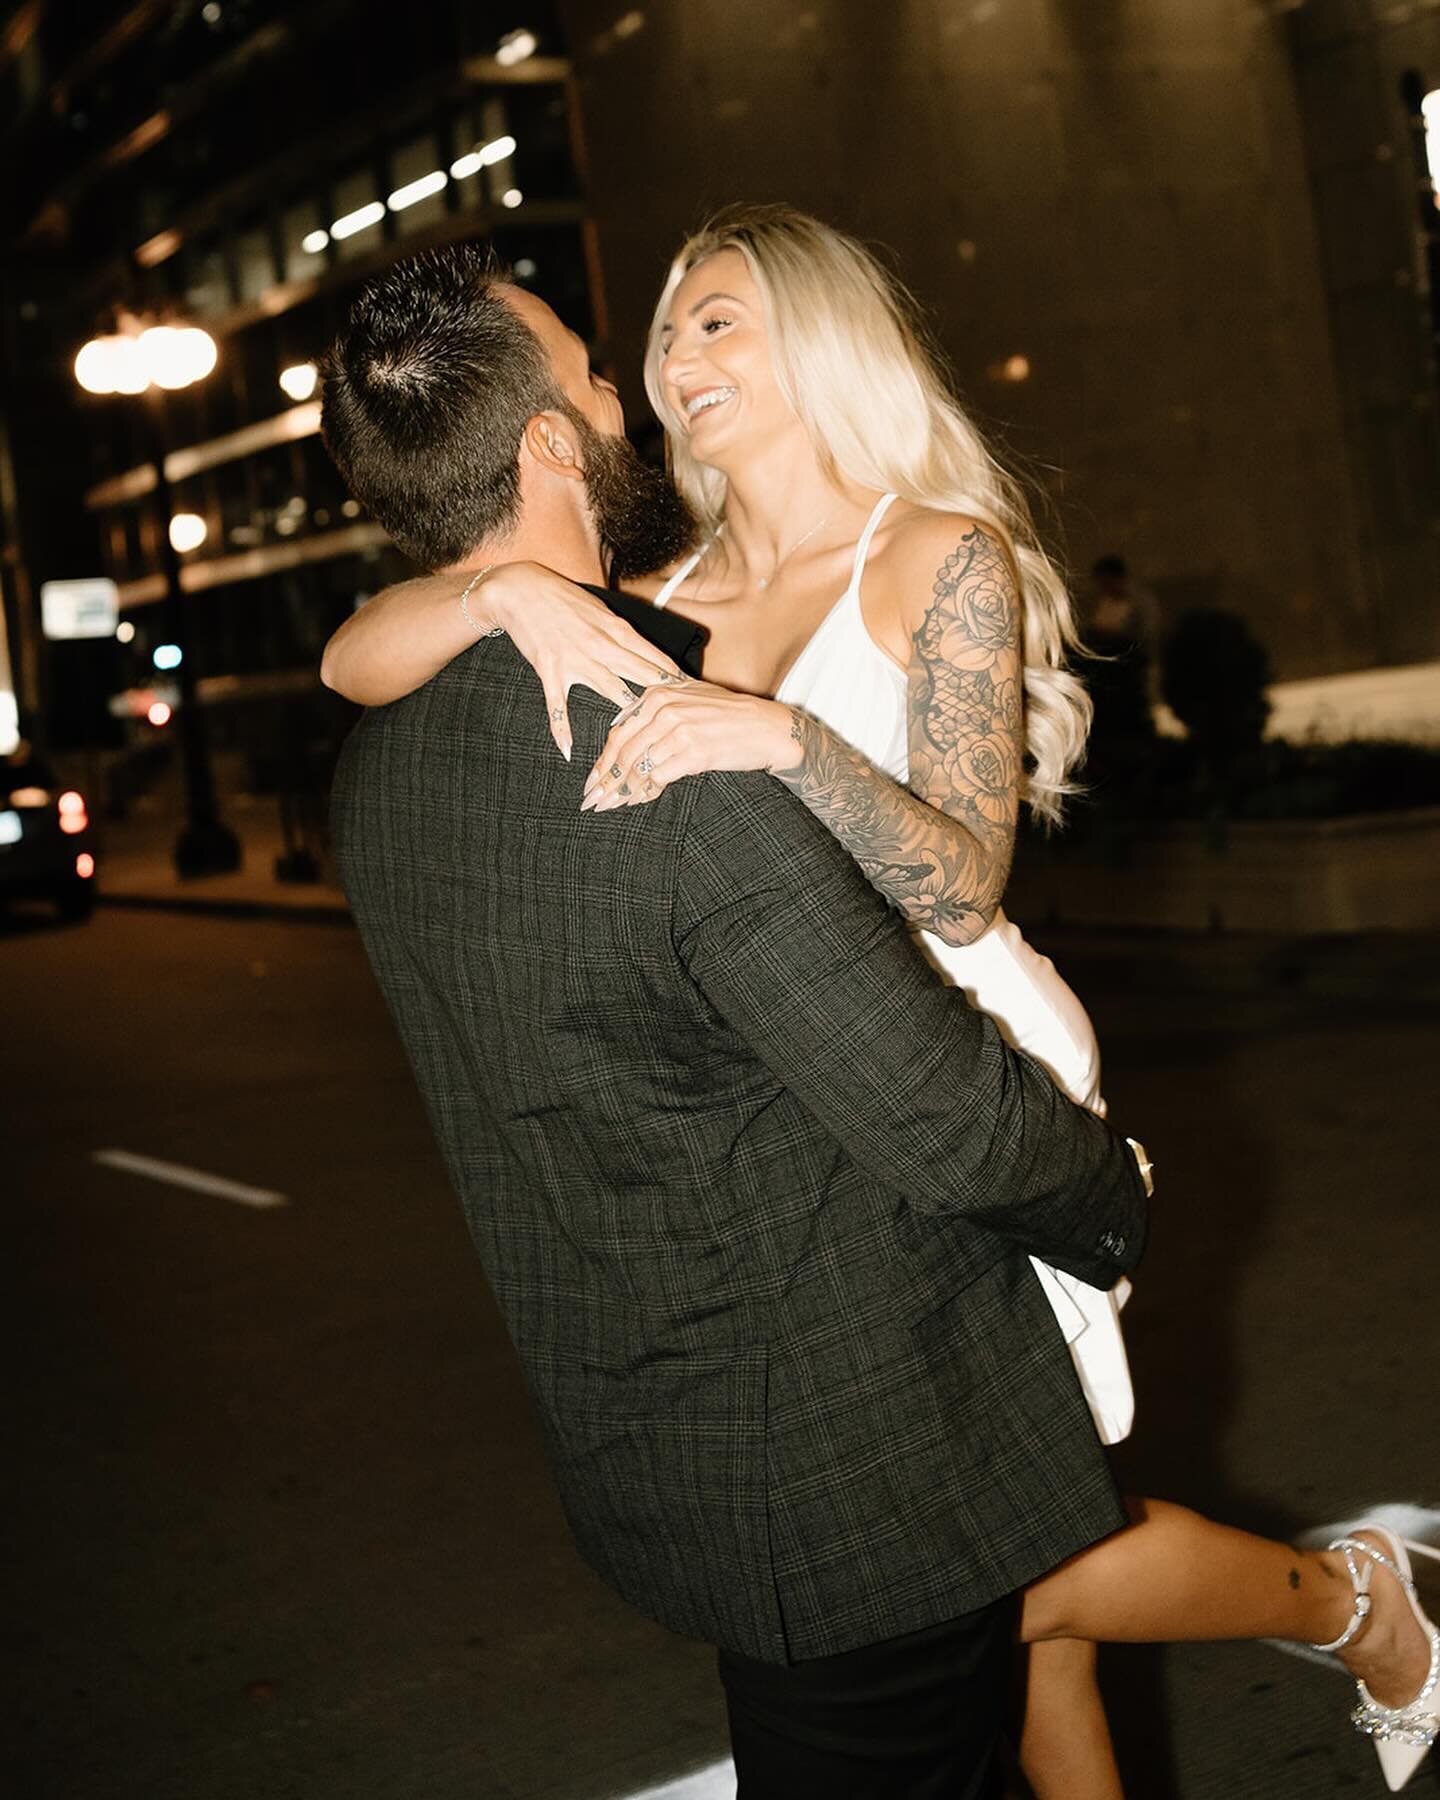 Marissa &amp; Michael&rsquo;s wedding portraits around the city 💜 They had a small intimate ceremony just the two of them, so they booked this session so they could document their love &amp; how gd badass they look in their wedding fits. Cheers y&rs